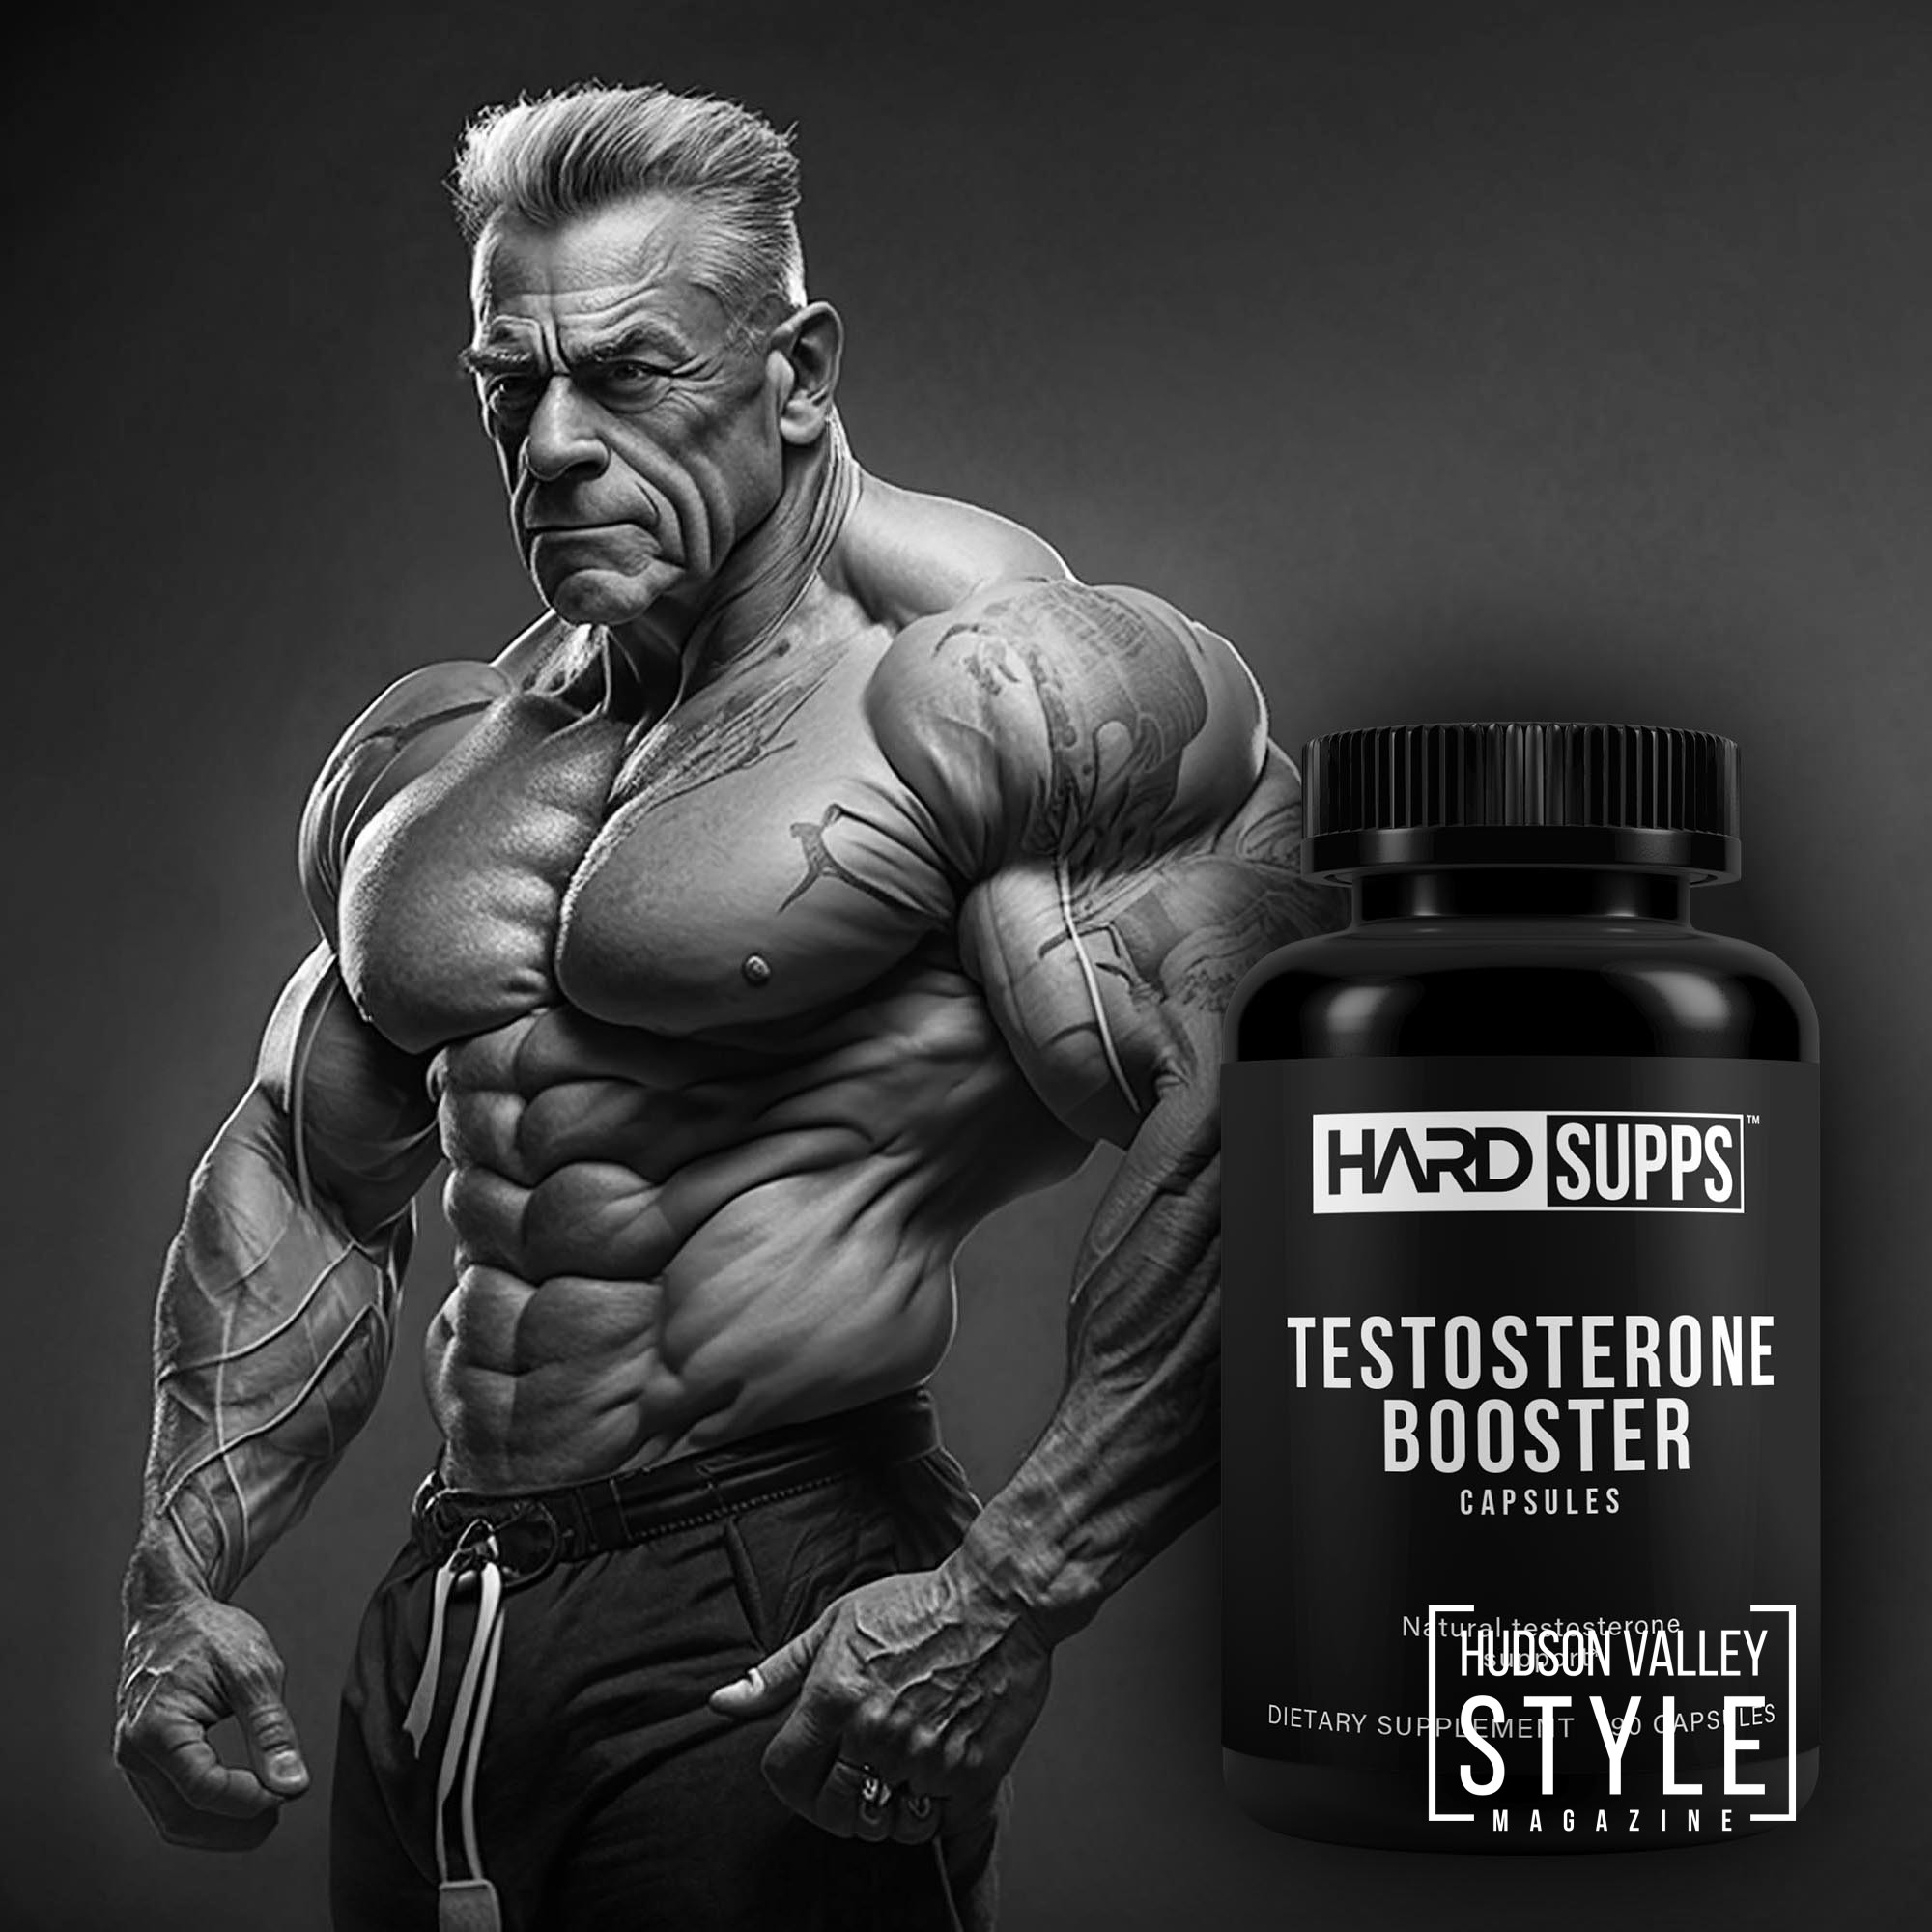 Natural Ways to Boost Testosterone Levels for Men Over 50 – Bodybuilding 101 with Coach Maxwell Alexander – Presented by HARD SUPPS